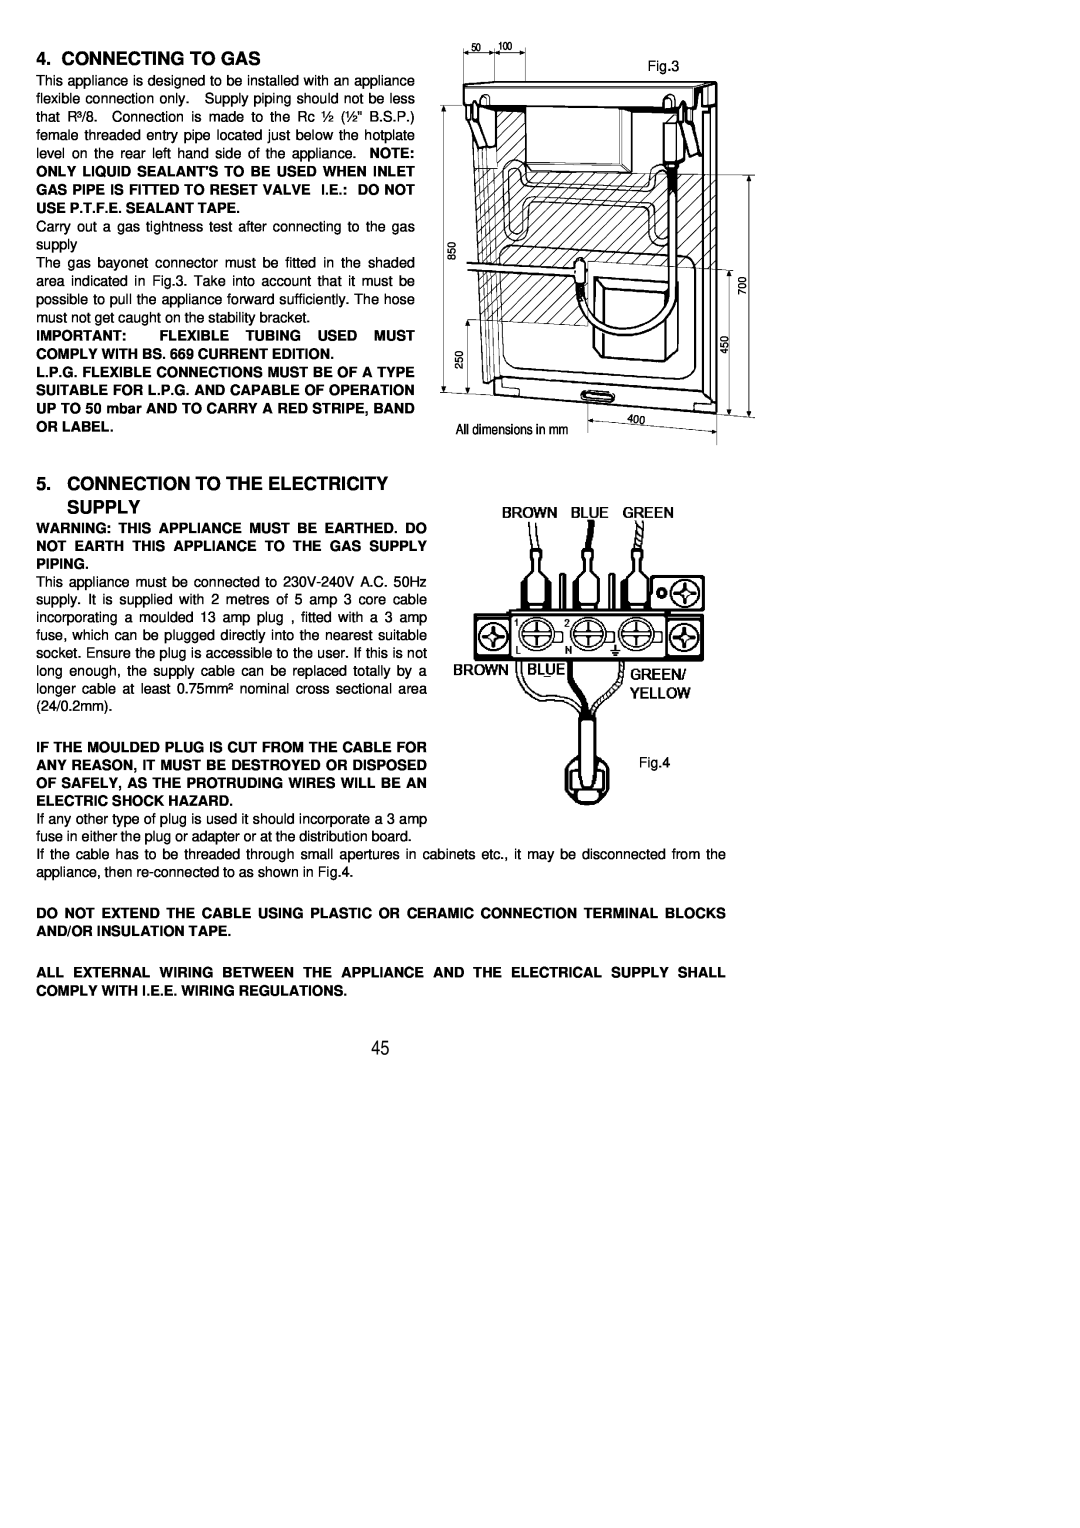 Electrolux SG 424 installation instructions Connecting To Gas, Connection To The Electricity Supply 